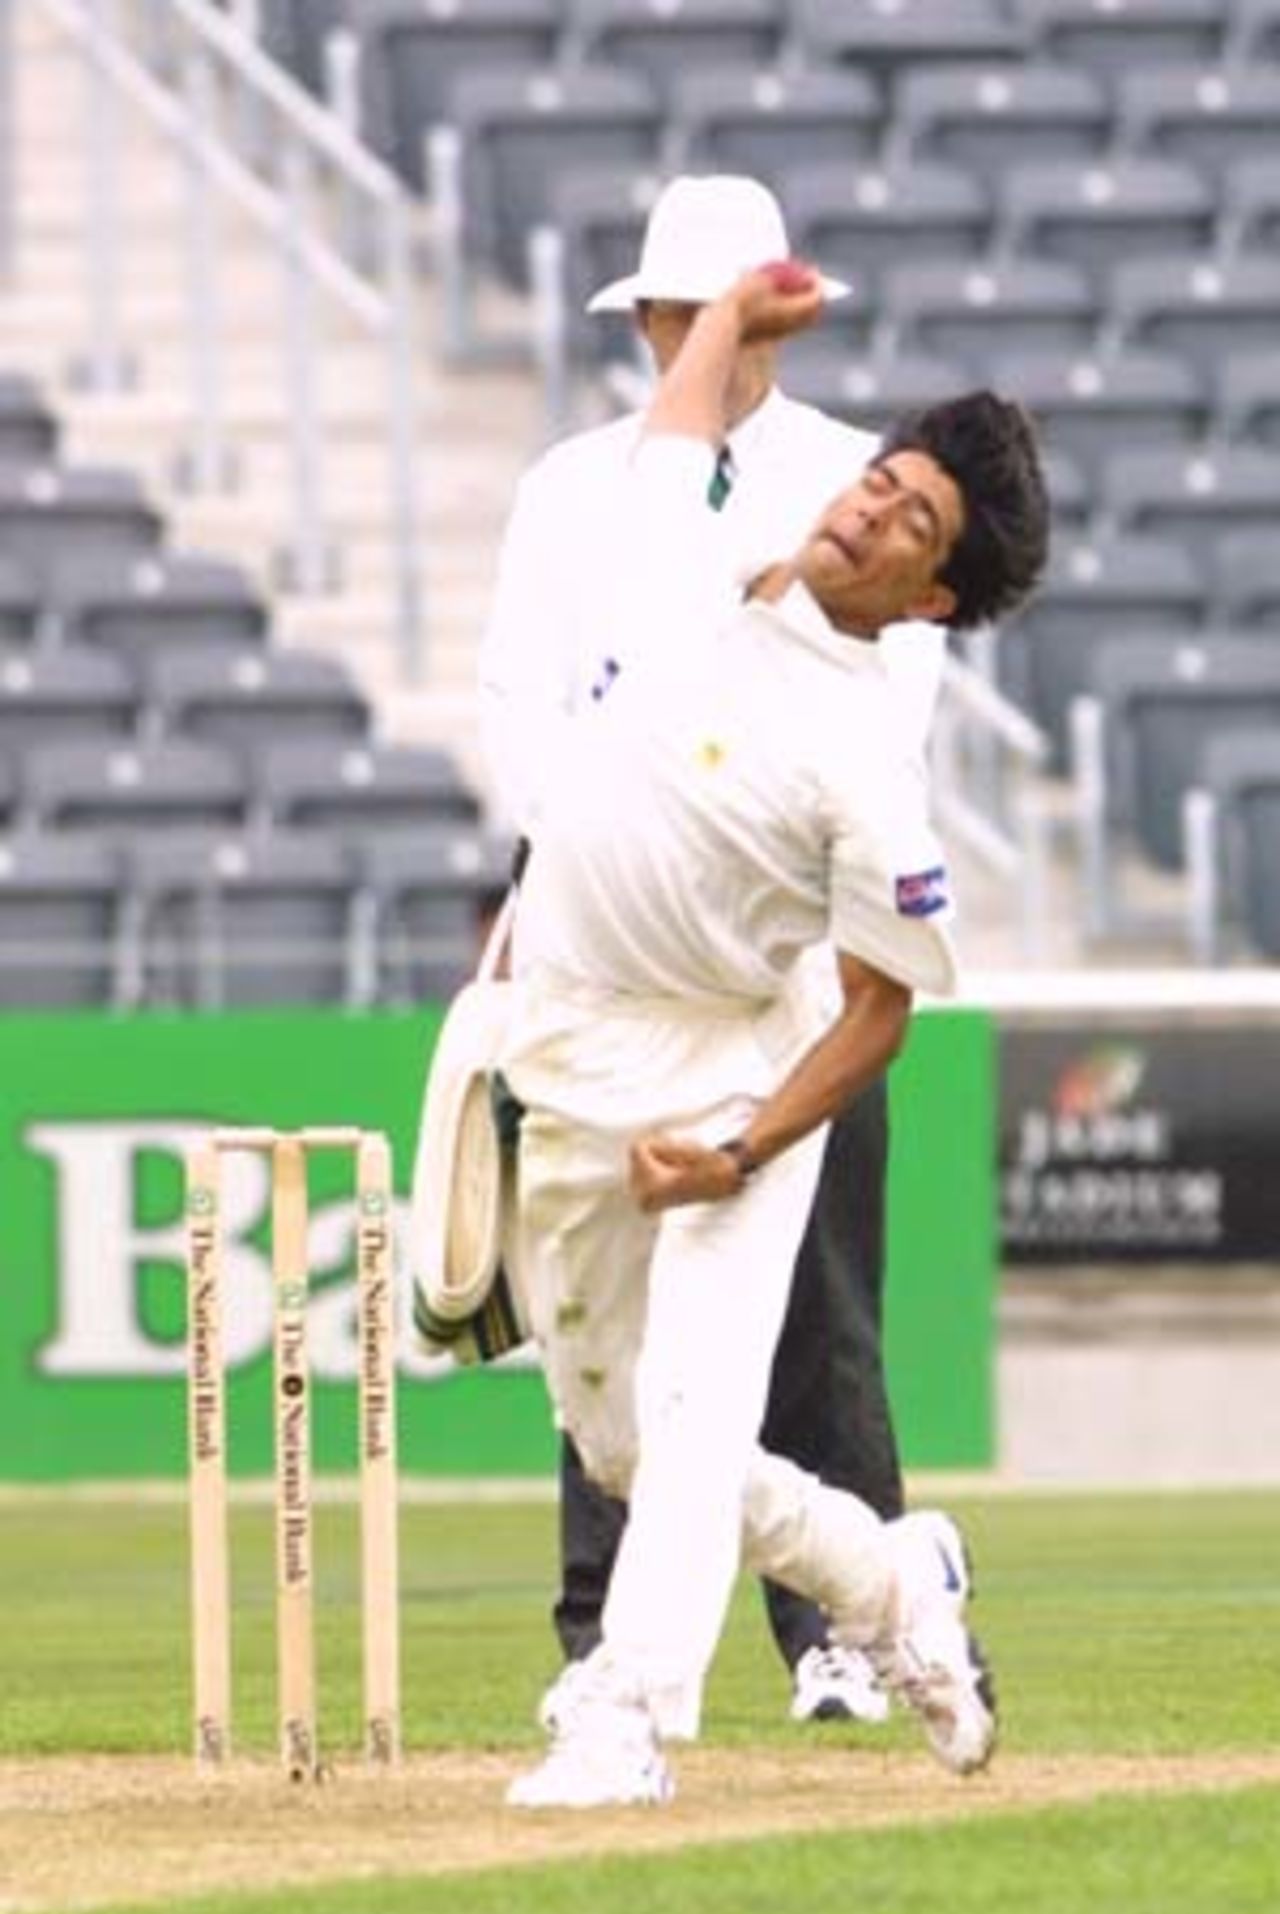 Pakistan fast bowler Mohammad Sami delivers during his first innings spell of 0-85 from 22 overs. Umpire Dave Quested looks on. 2nd Test: New Zealand v Pakistan at Jade Stadium, Christchurch, 15-19 March 2001 (15 March 2001).